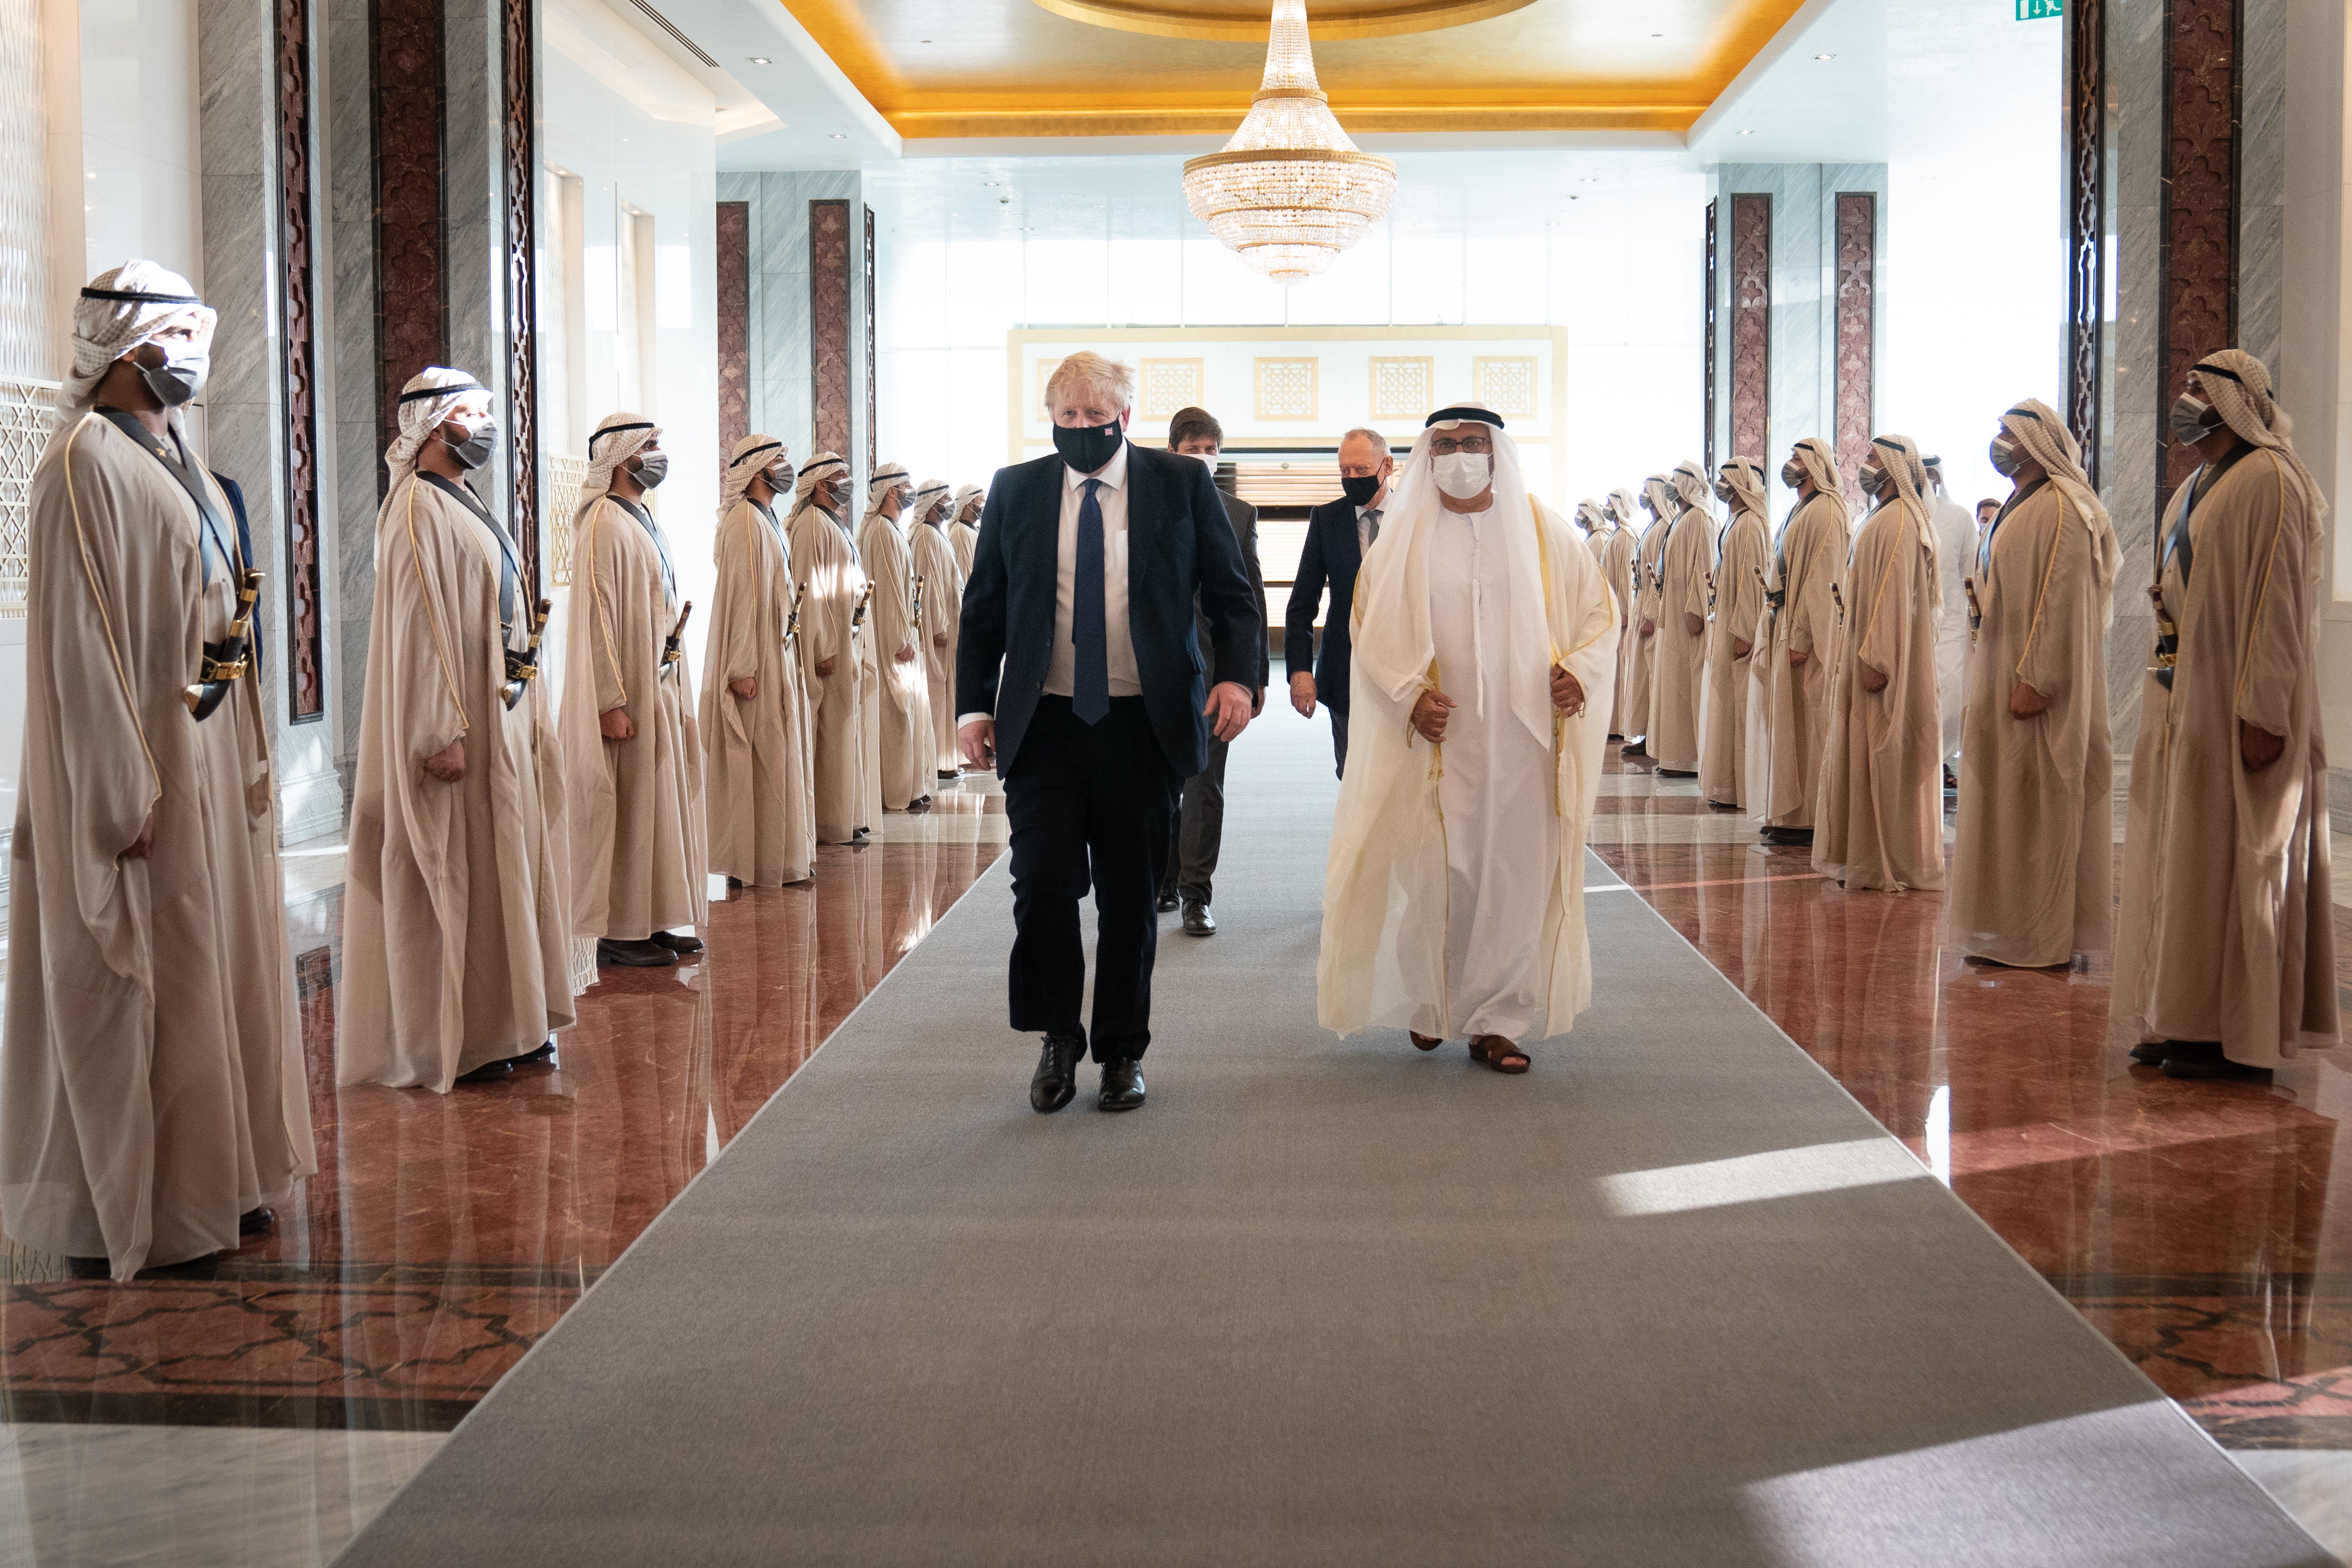 Boris Johnson inspects the Guard of Honour as he arrives at Abu Dhabi airport (Stefan Rousseau/PA)